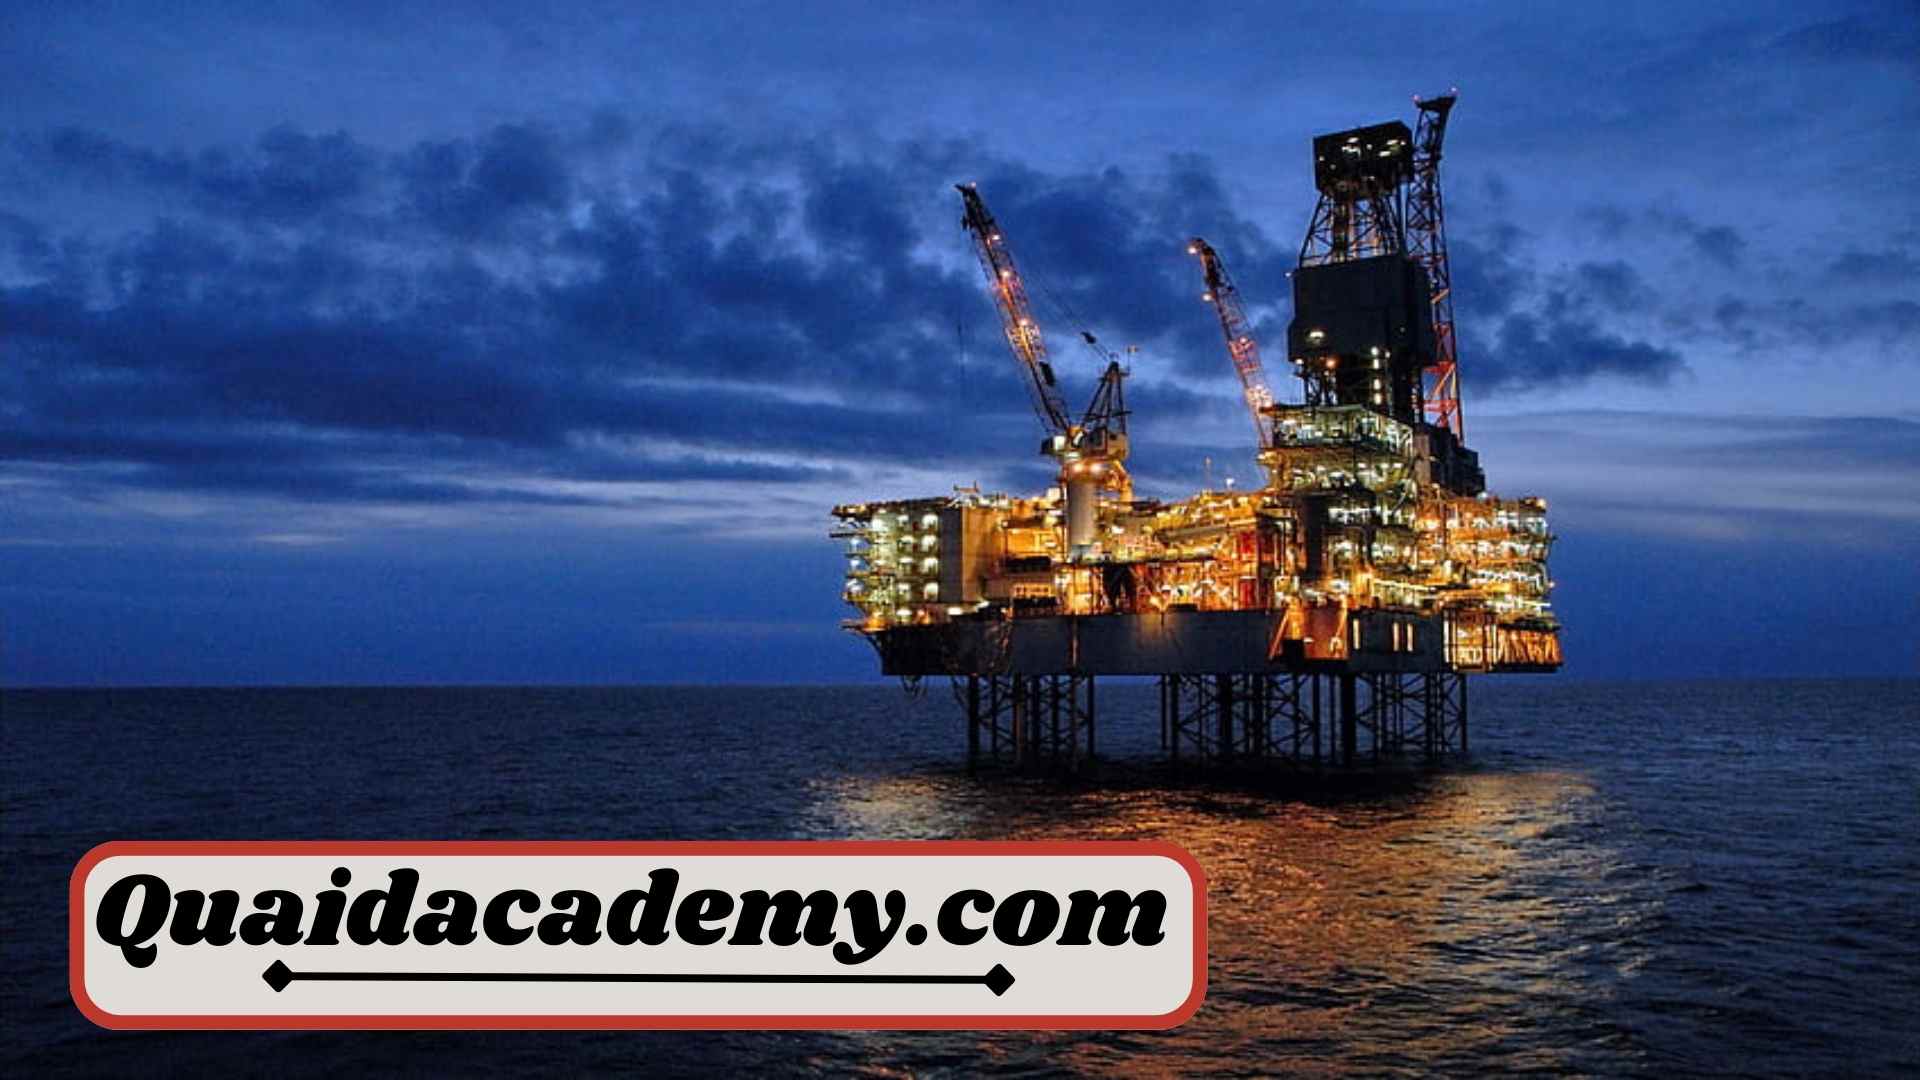 Personal Injury Lawyer Houston: Maritime & Oil Rig Accidents